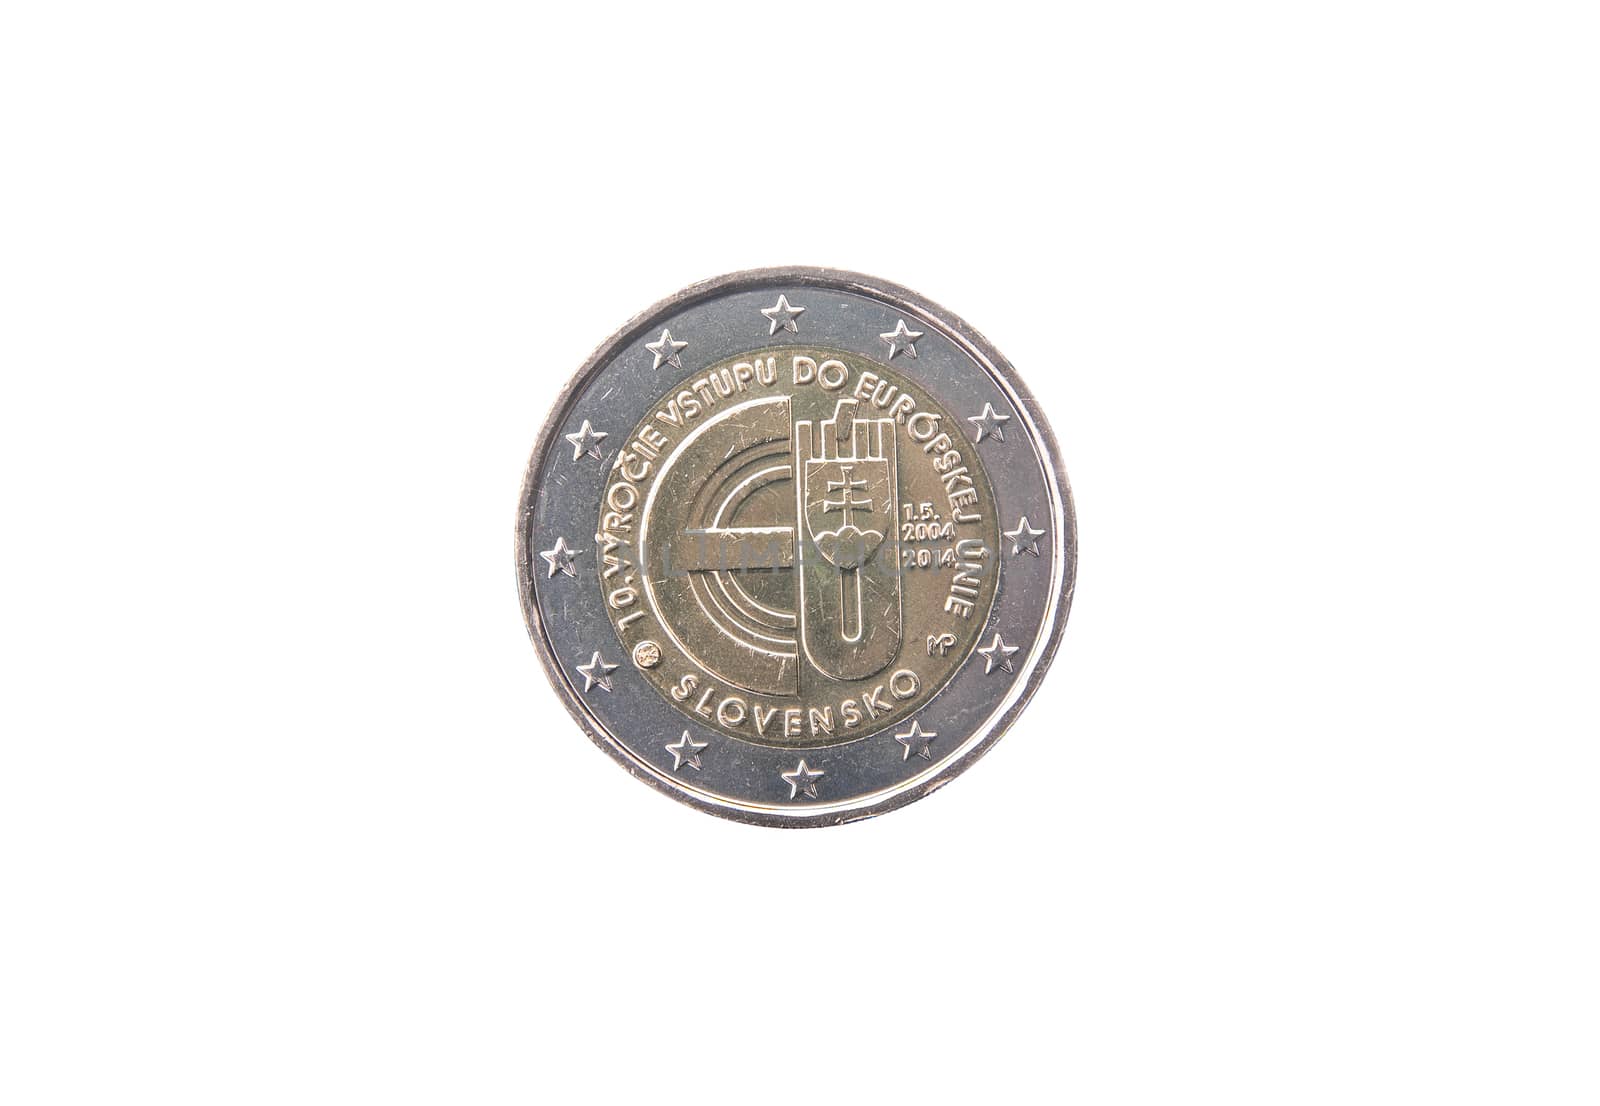 Commemorative coin of Slovakia minted in 2014 isolated on white